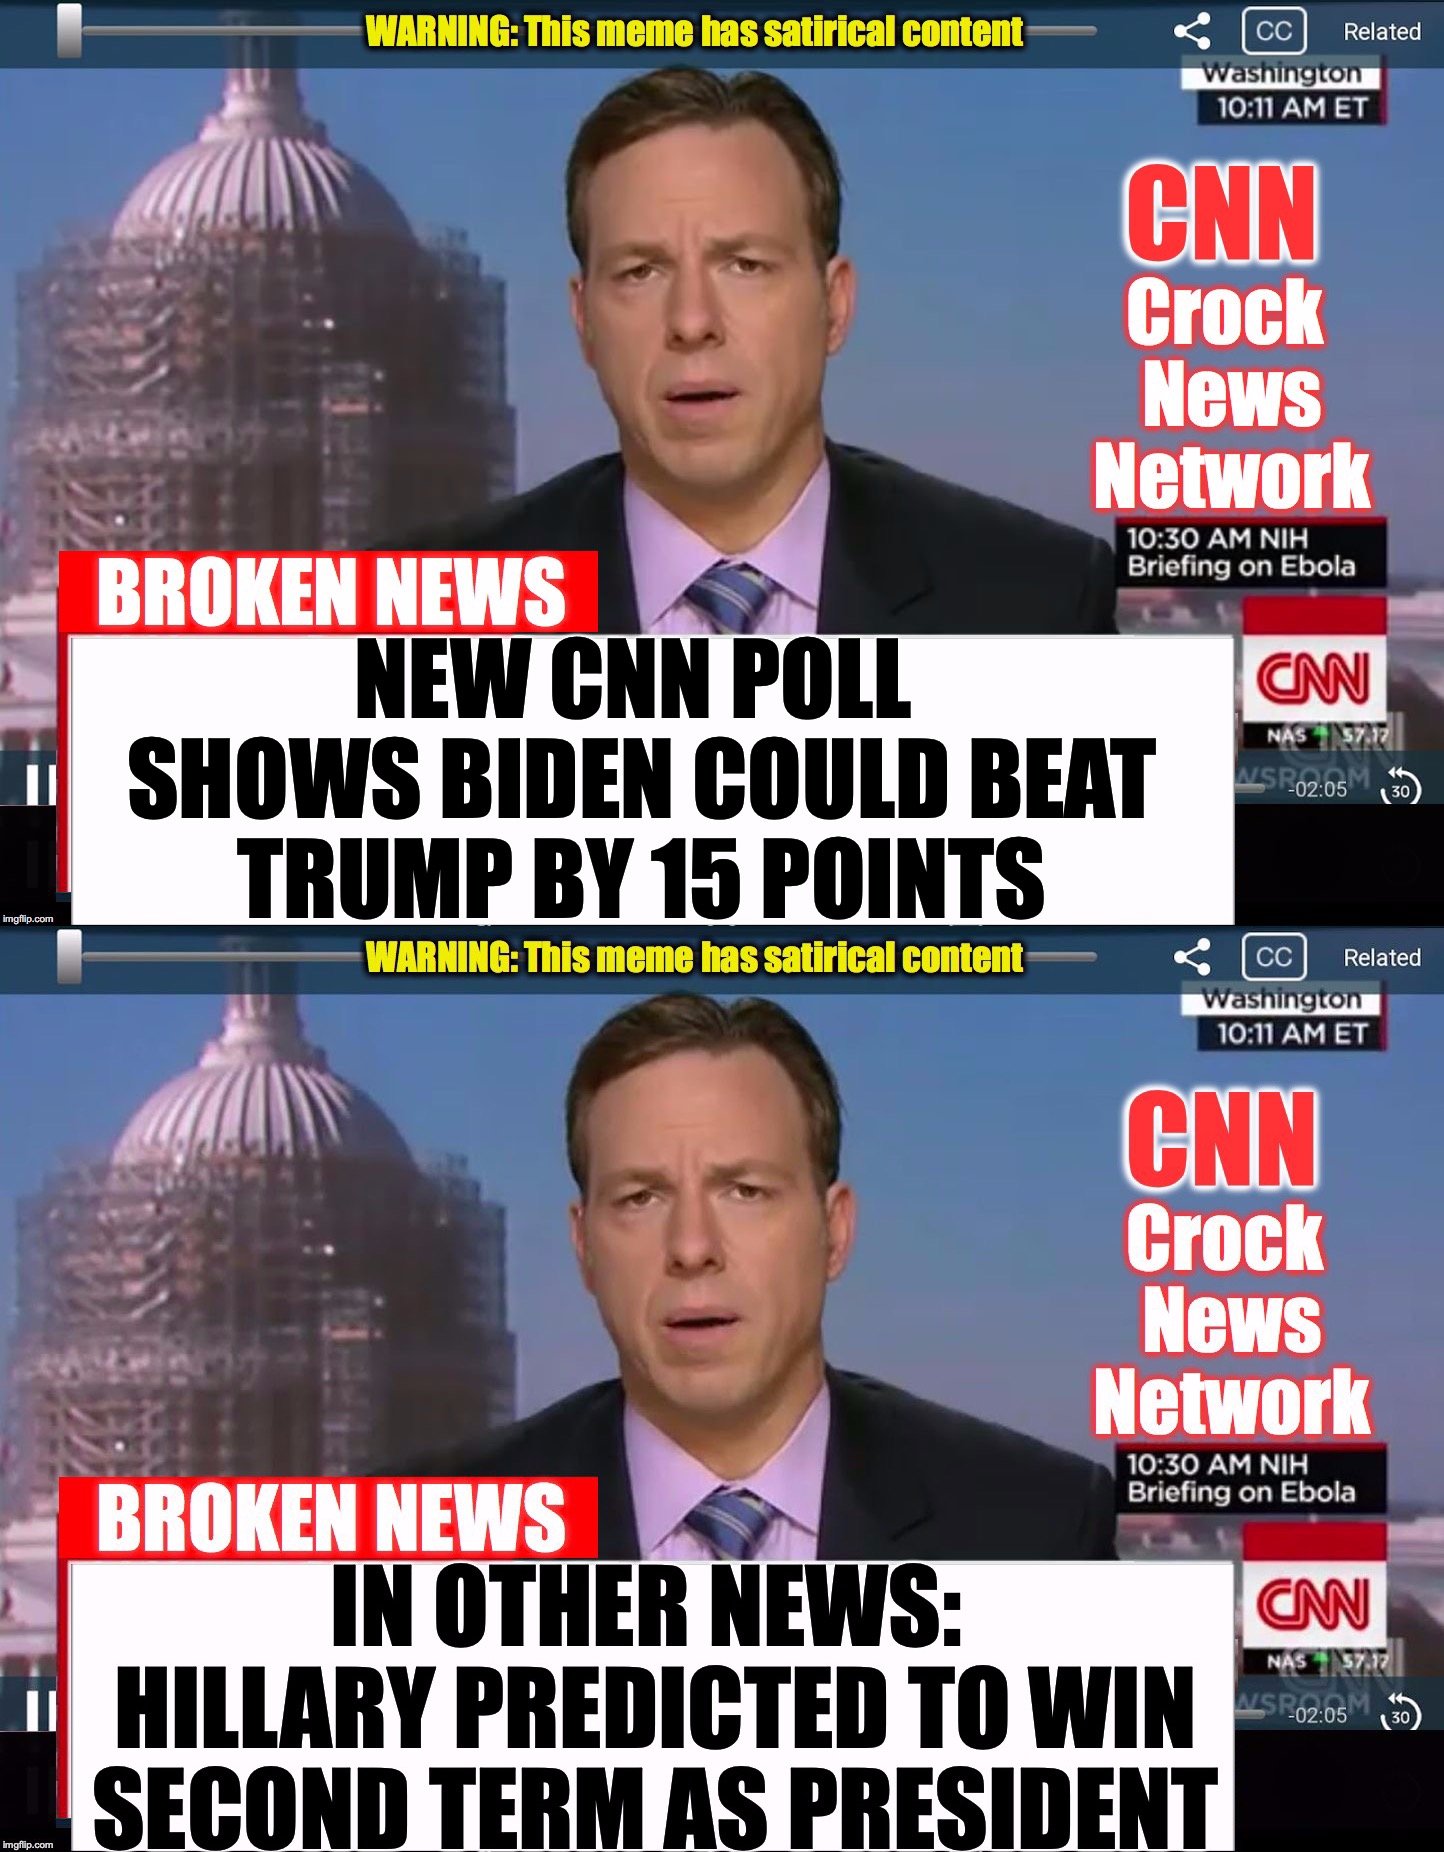 NEW CNN POLL SHOWS BIDEN COULD BEAT TRUMP BY 15 POINTS | image tagged in cnn crock news network | made w/ Imgflip meme maker